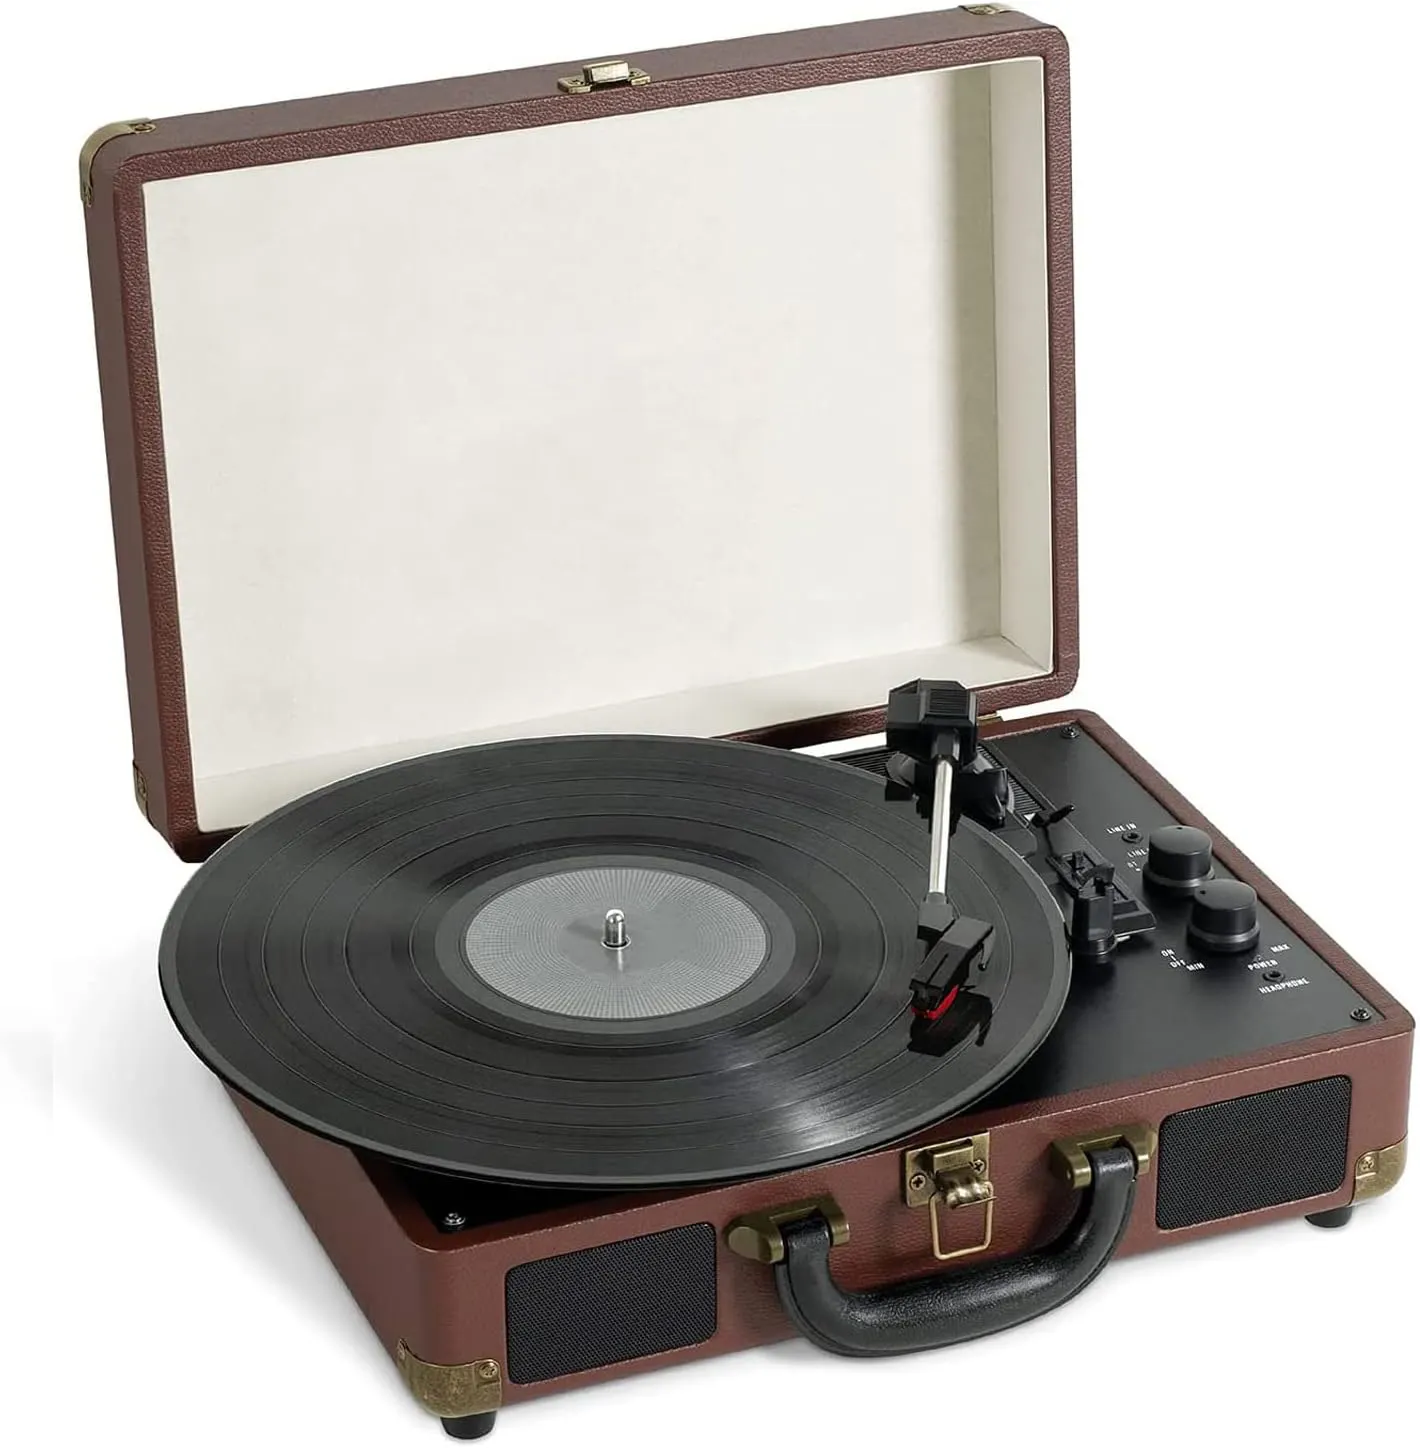 Portable 3-Speed Wooden Suitcase Turntable Record Player Audio & Video Accessories for Vinyl Records